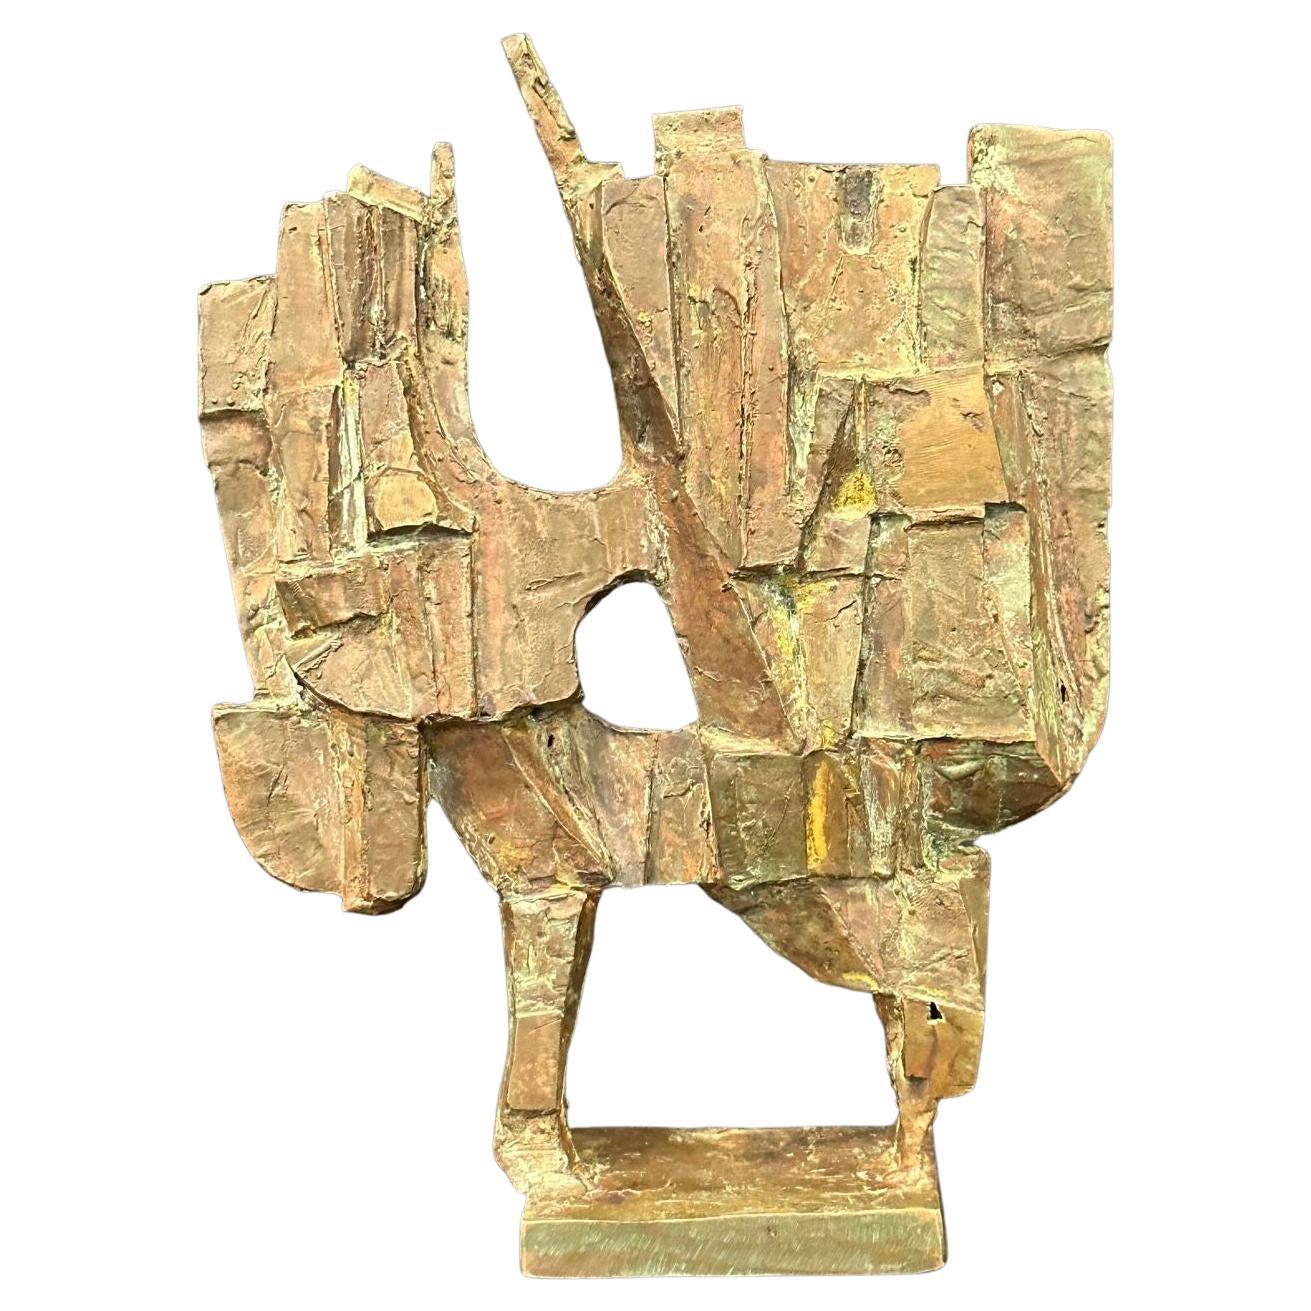 Midcentury Brutalist Abstract Sculpture, Patinated Bronze Decorative Art Object For Sale